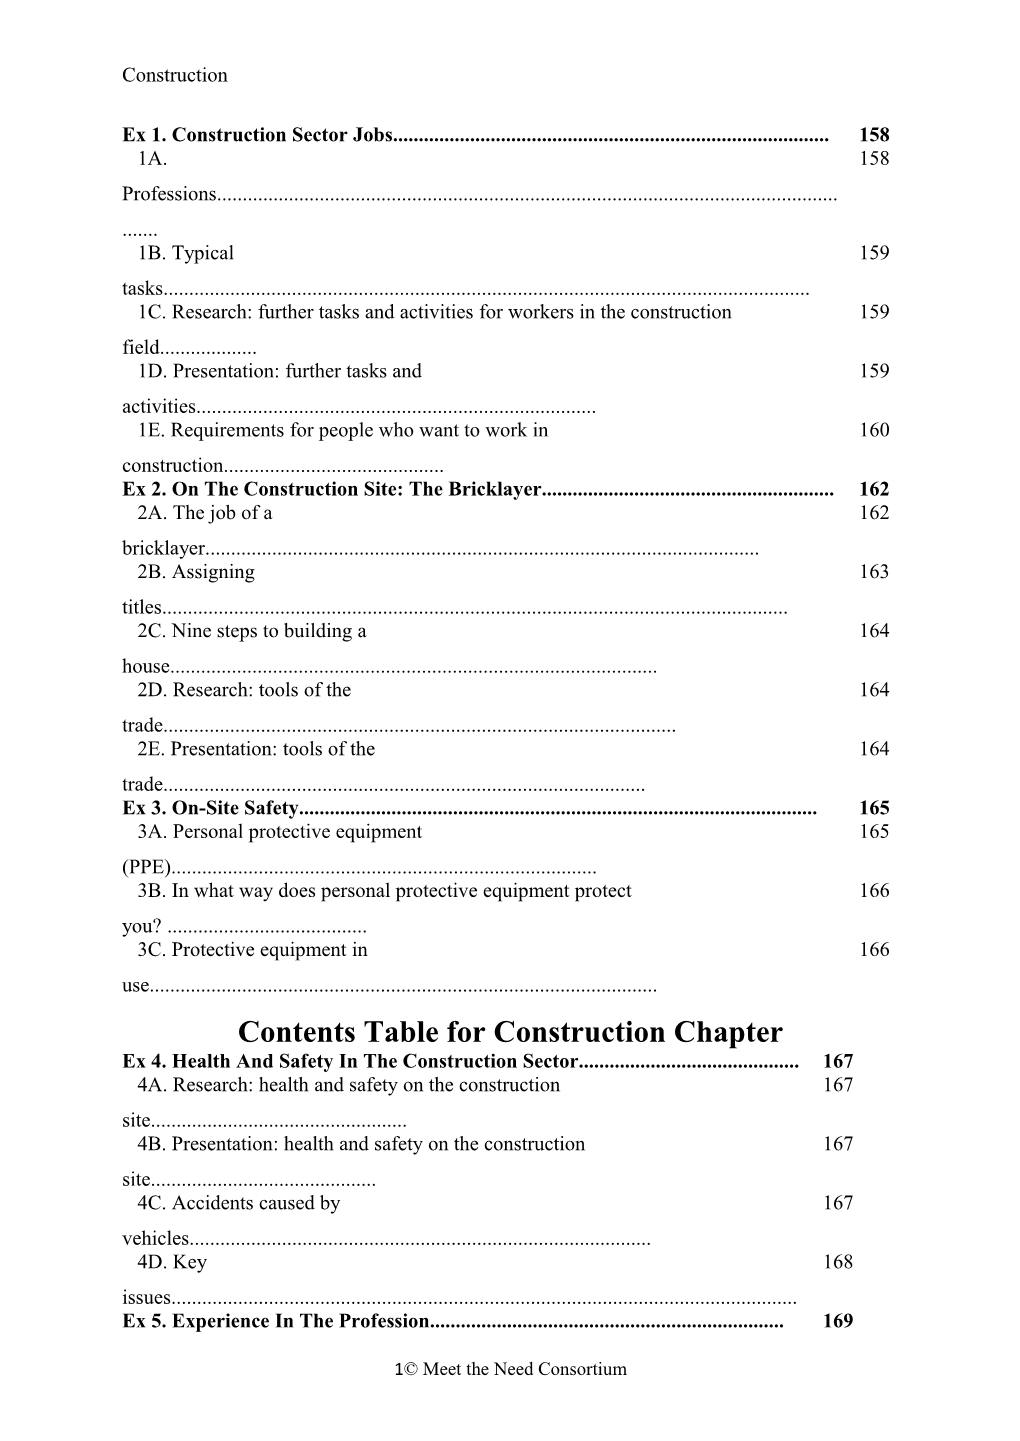 Contents Table for Construction Chapter